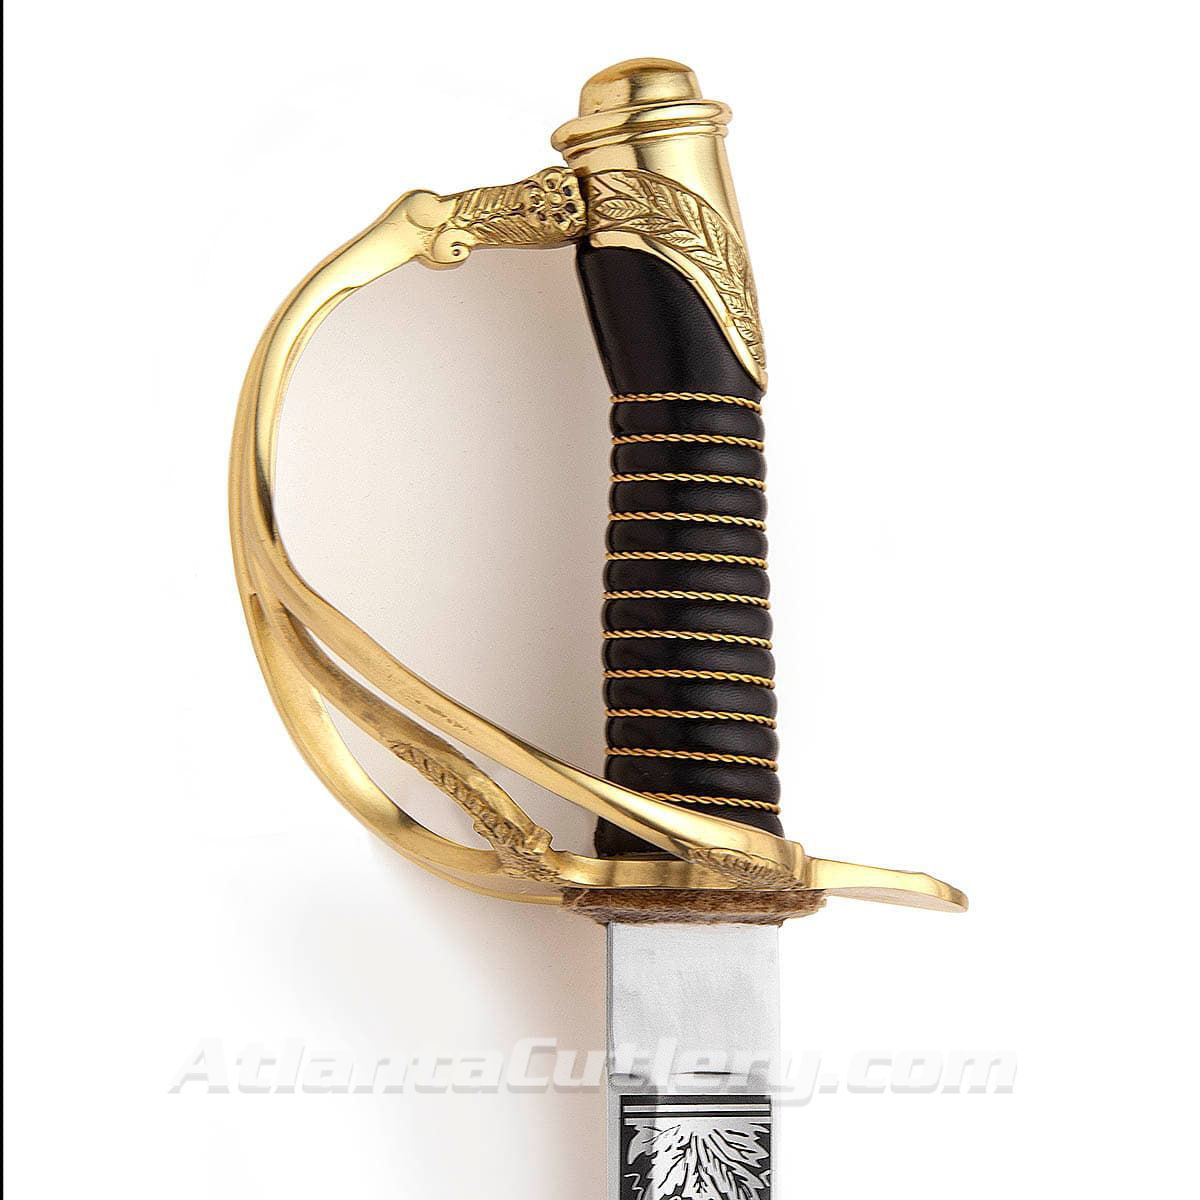 Hilt of Model 1860 Union Cavalry Officer's Saber